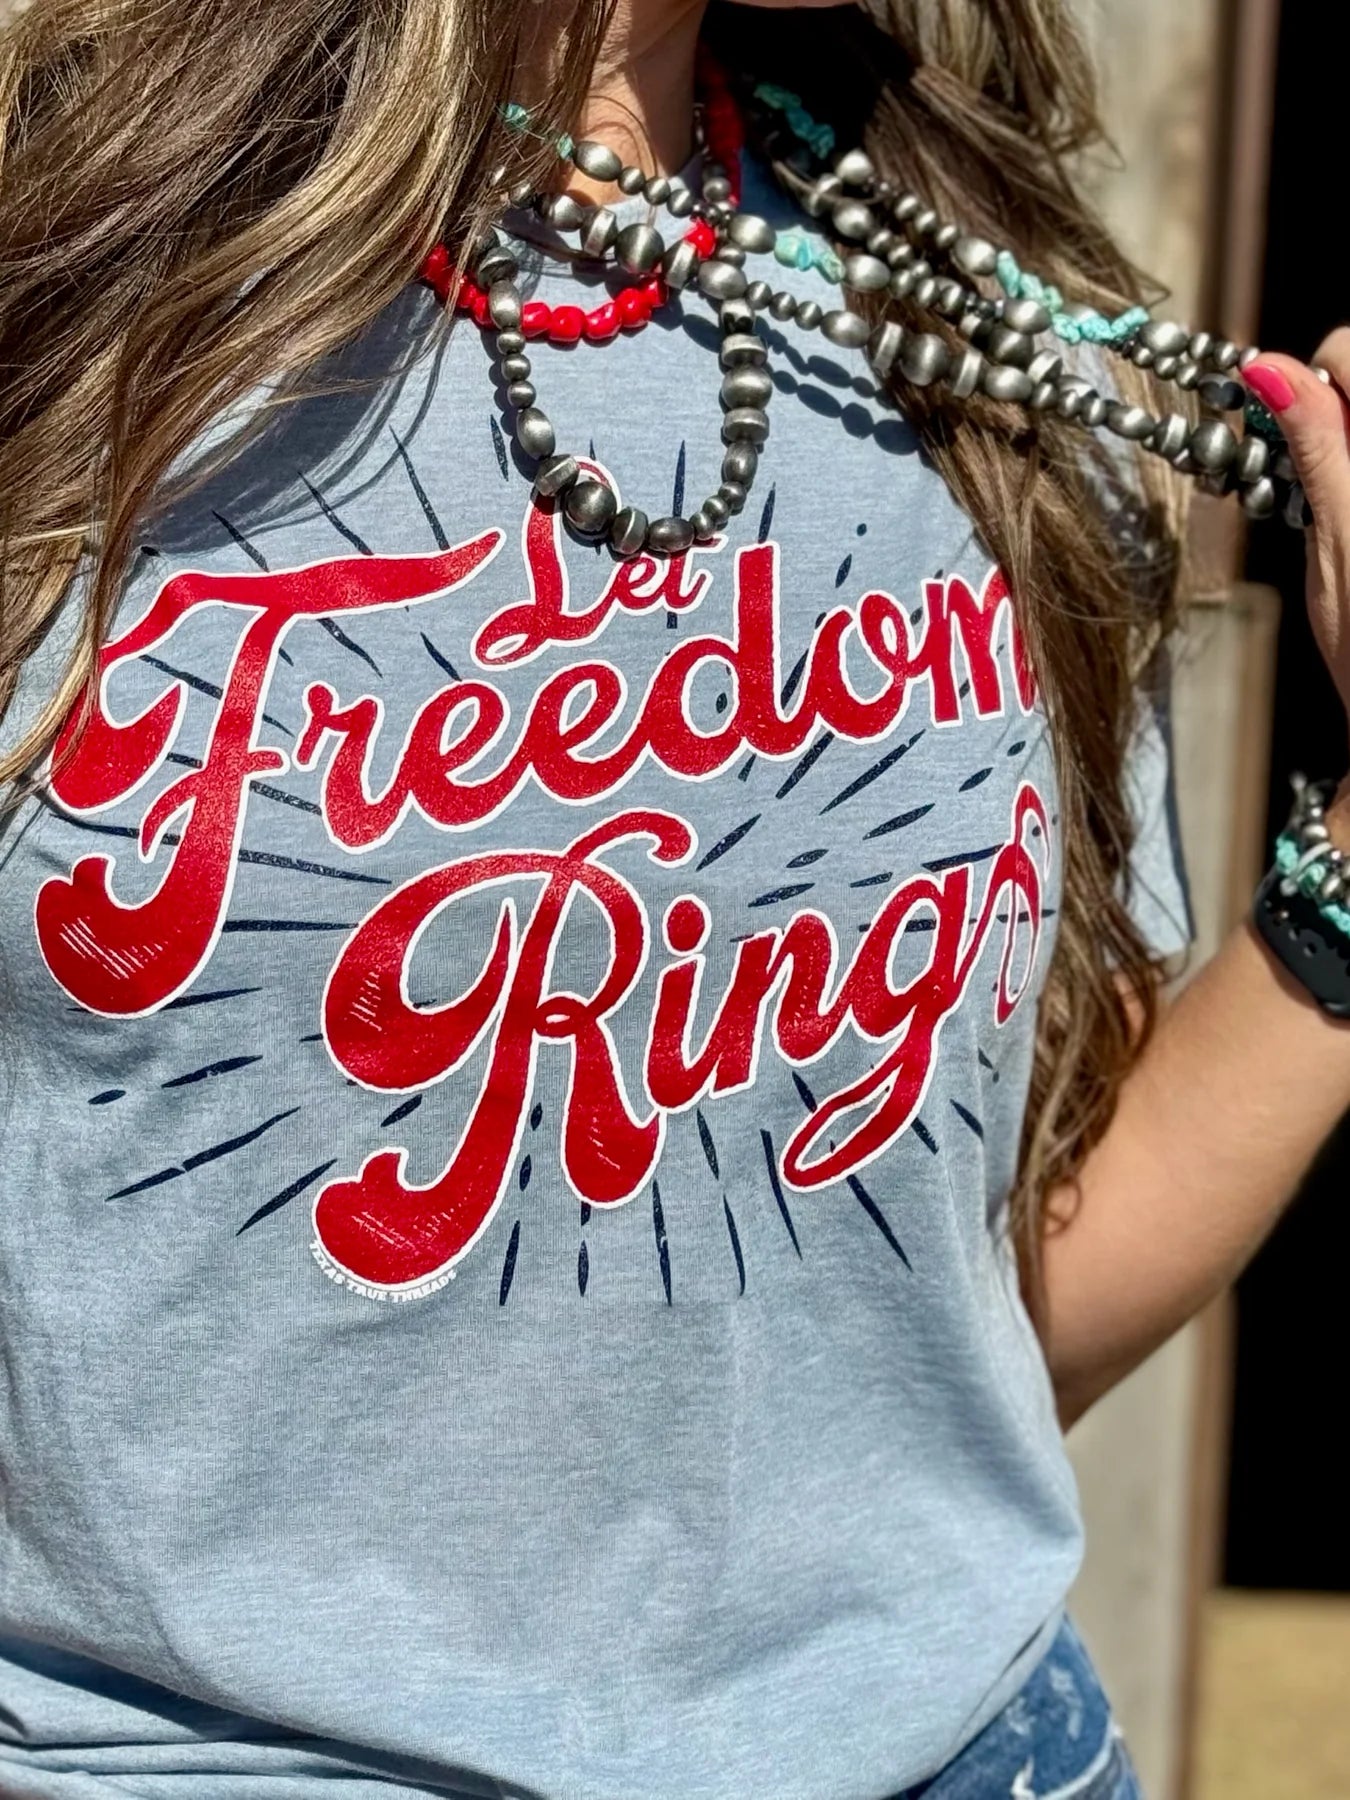 LET FREEDOM RING TEE